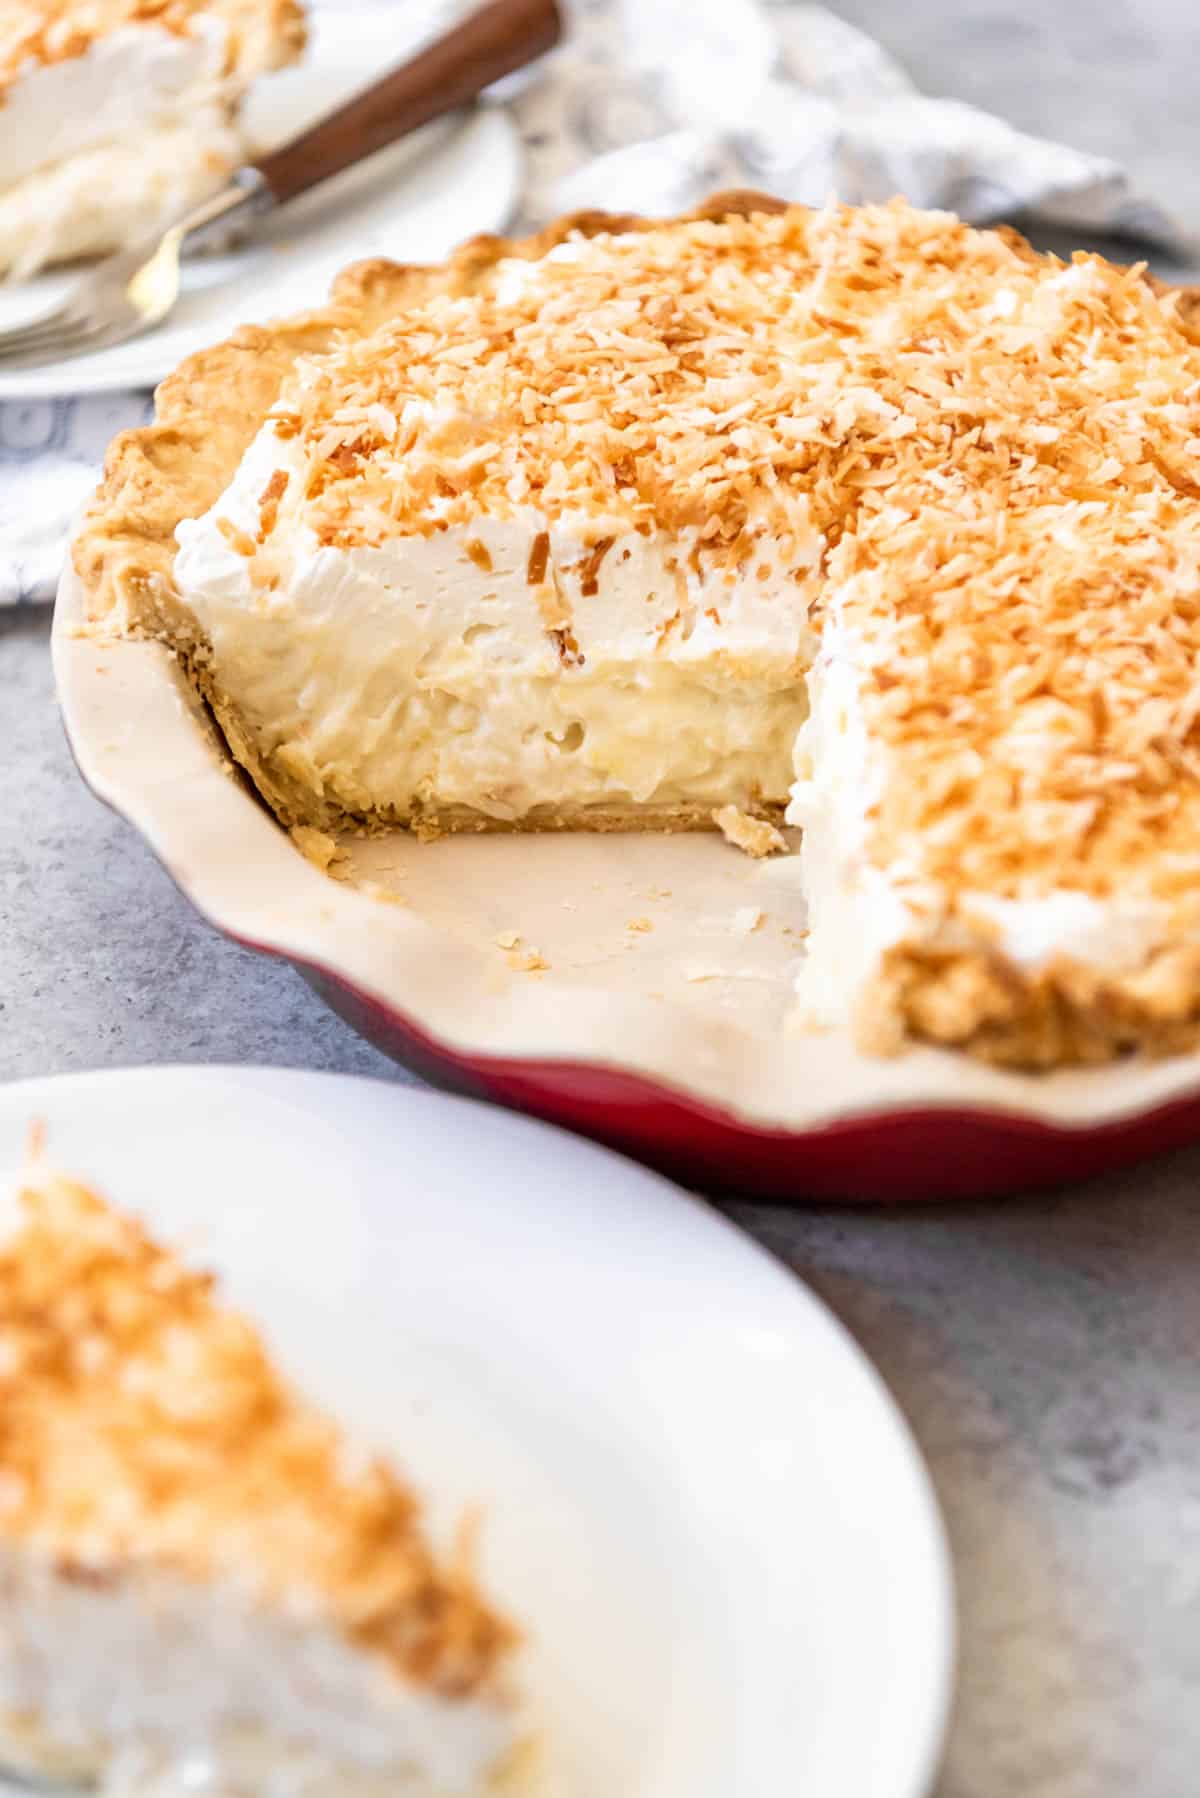 A coconut cream pie with slices removed and placed on plates to the side.